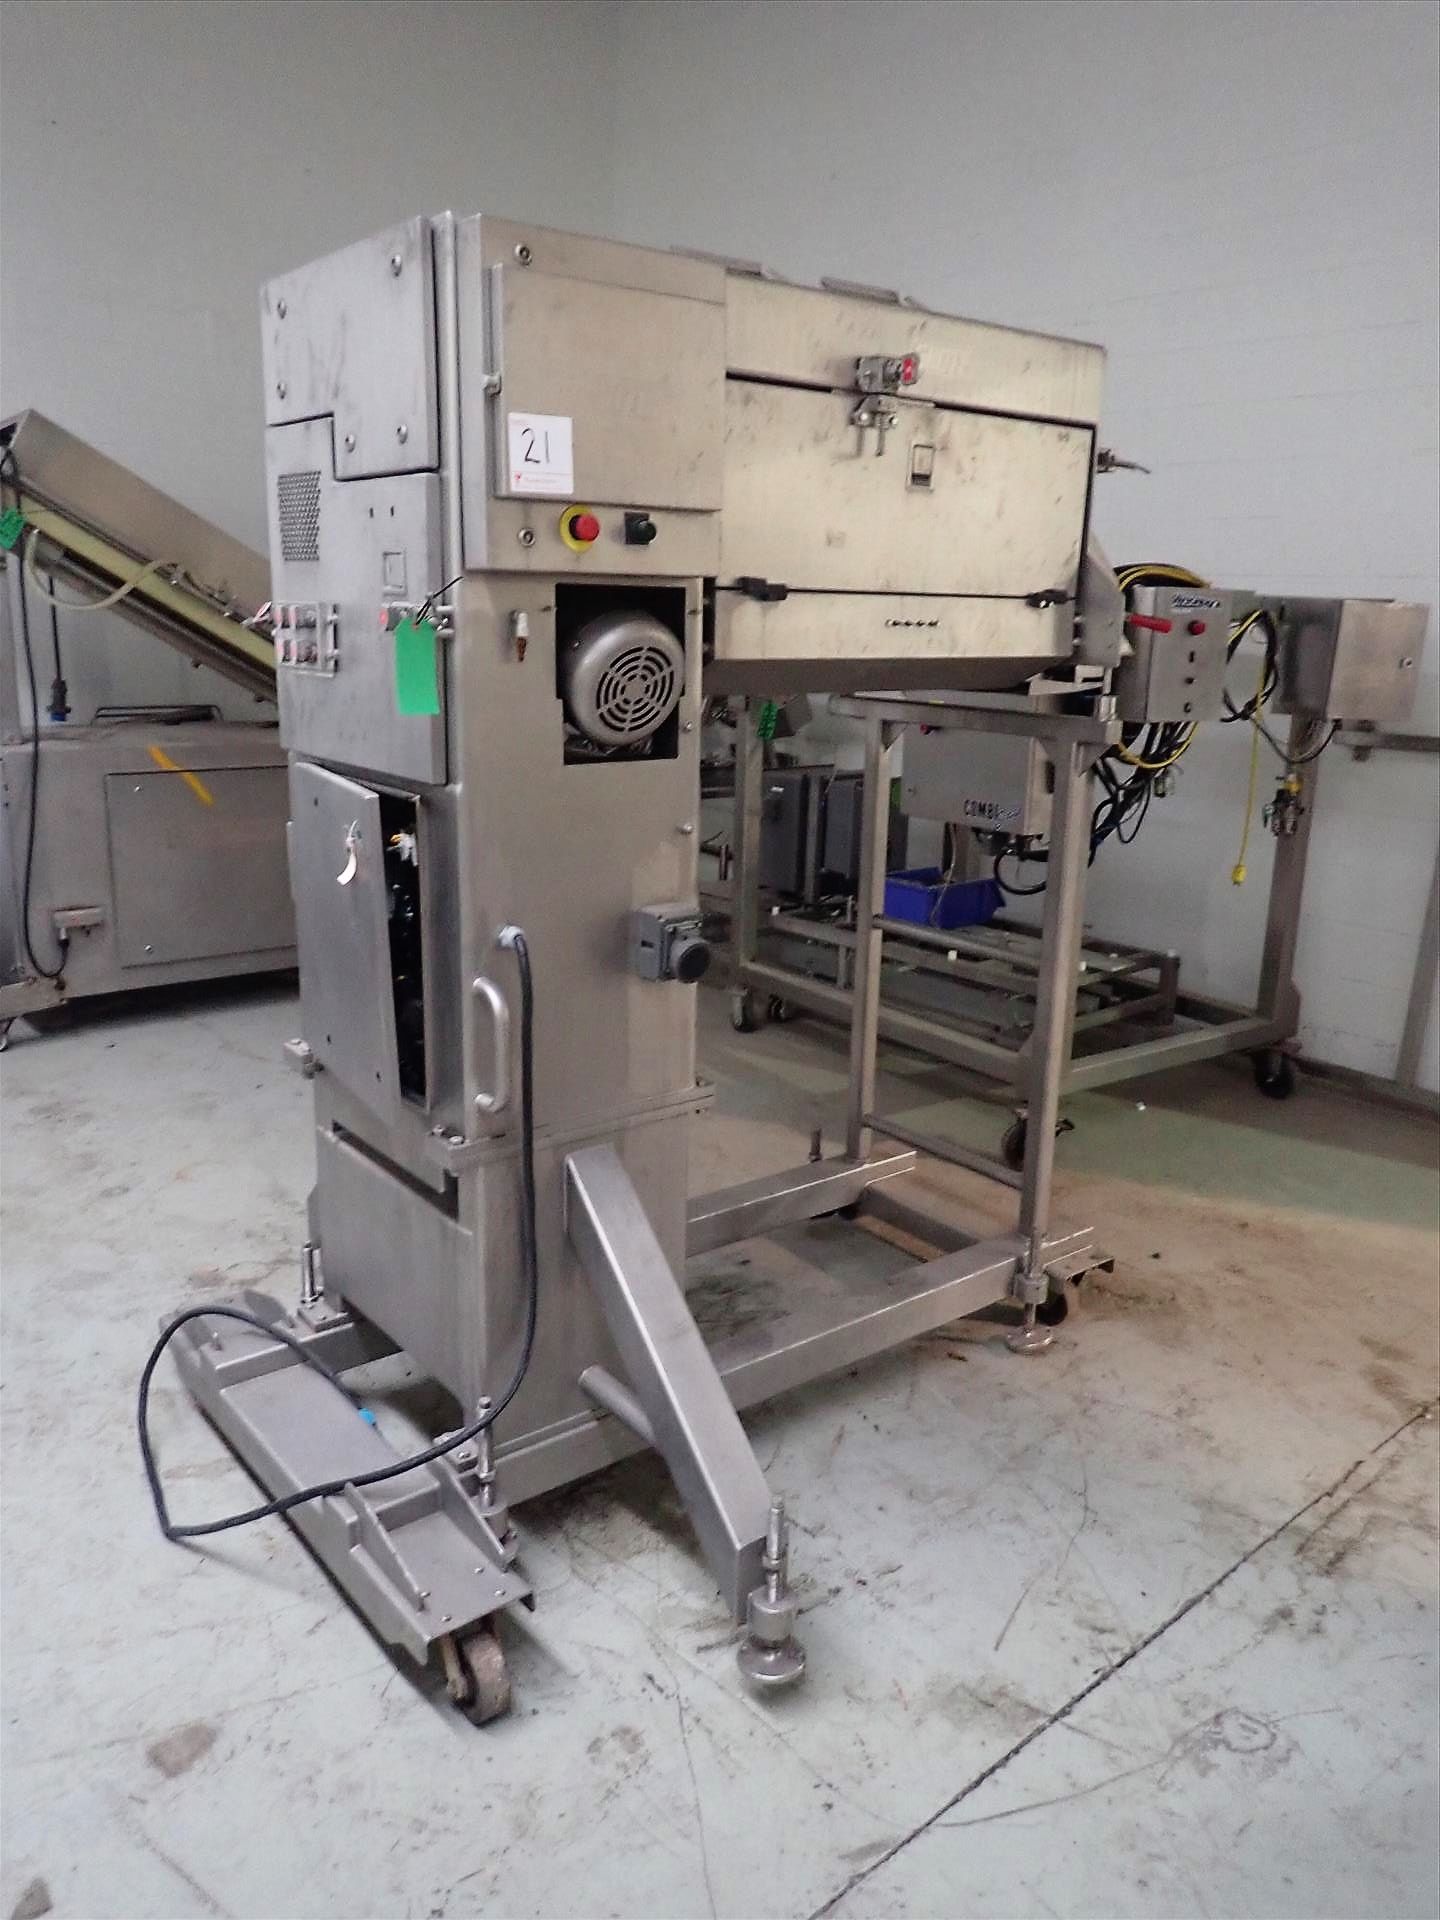 Grote slicer/applicator, s/s, mod. S/A-530-SD, ser. no. 1150474 w/ PanelView C1000 touch-screen